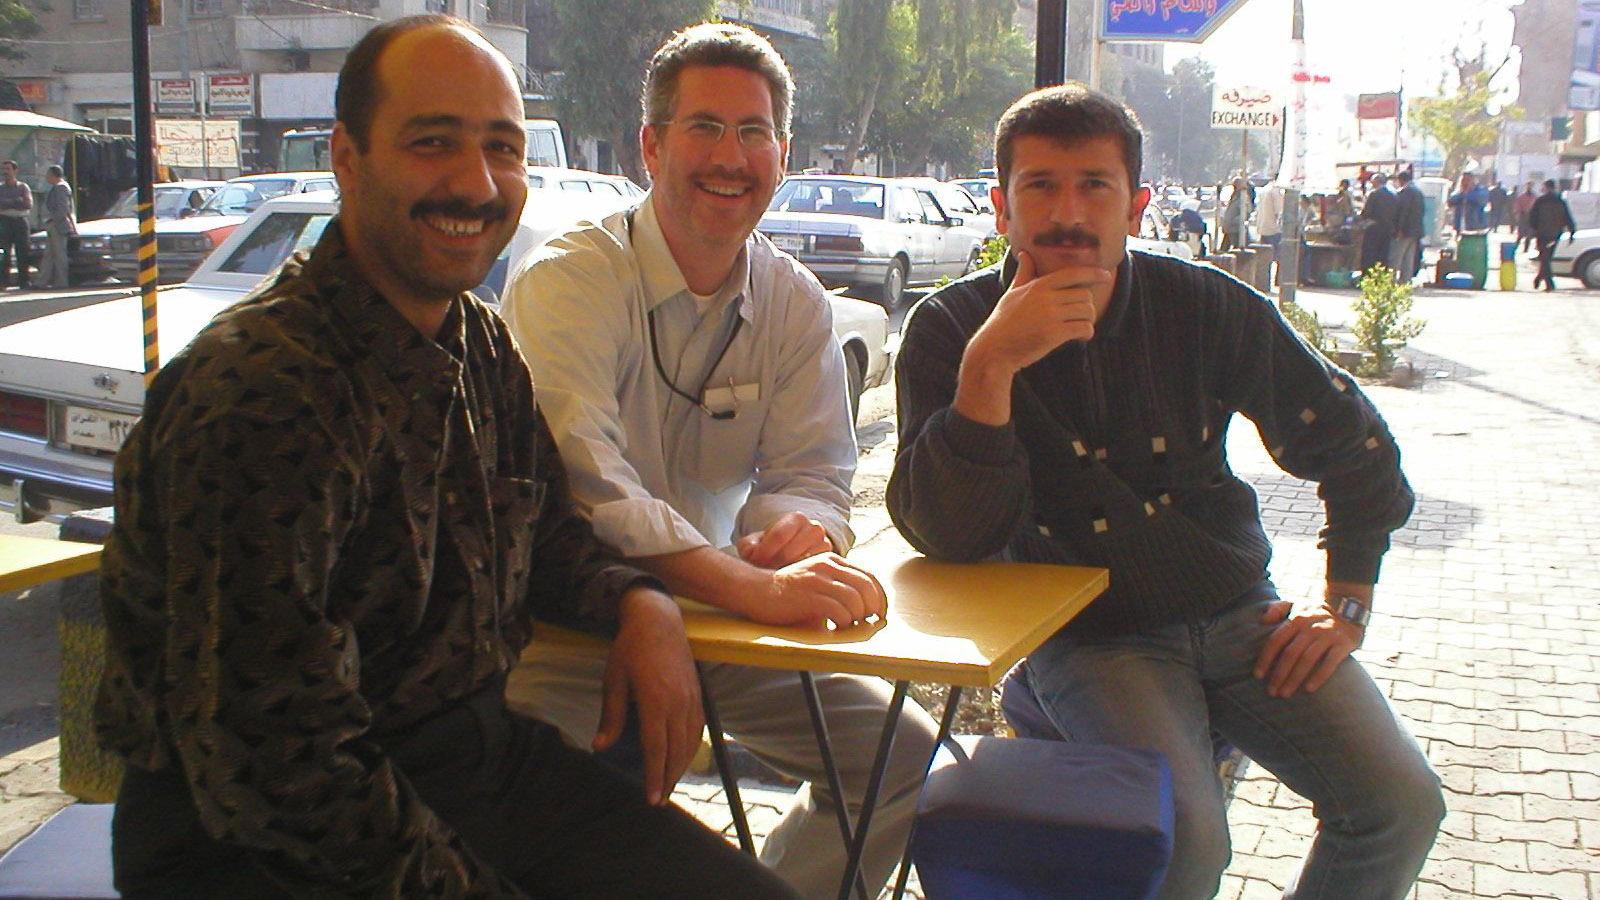 Translator extraordinaire Ayub Nuri on the right, along with reporter Aaron Schachter and their driver Abdulrazzaq Zanjeel at a street cafe in Baghdad in 2003.